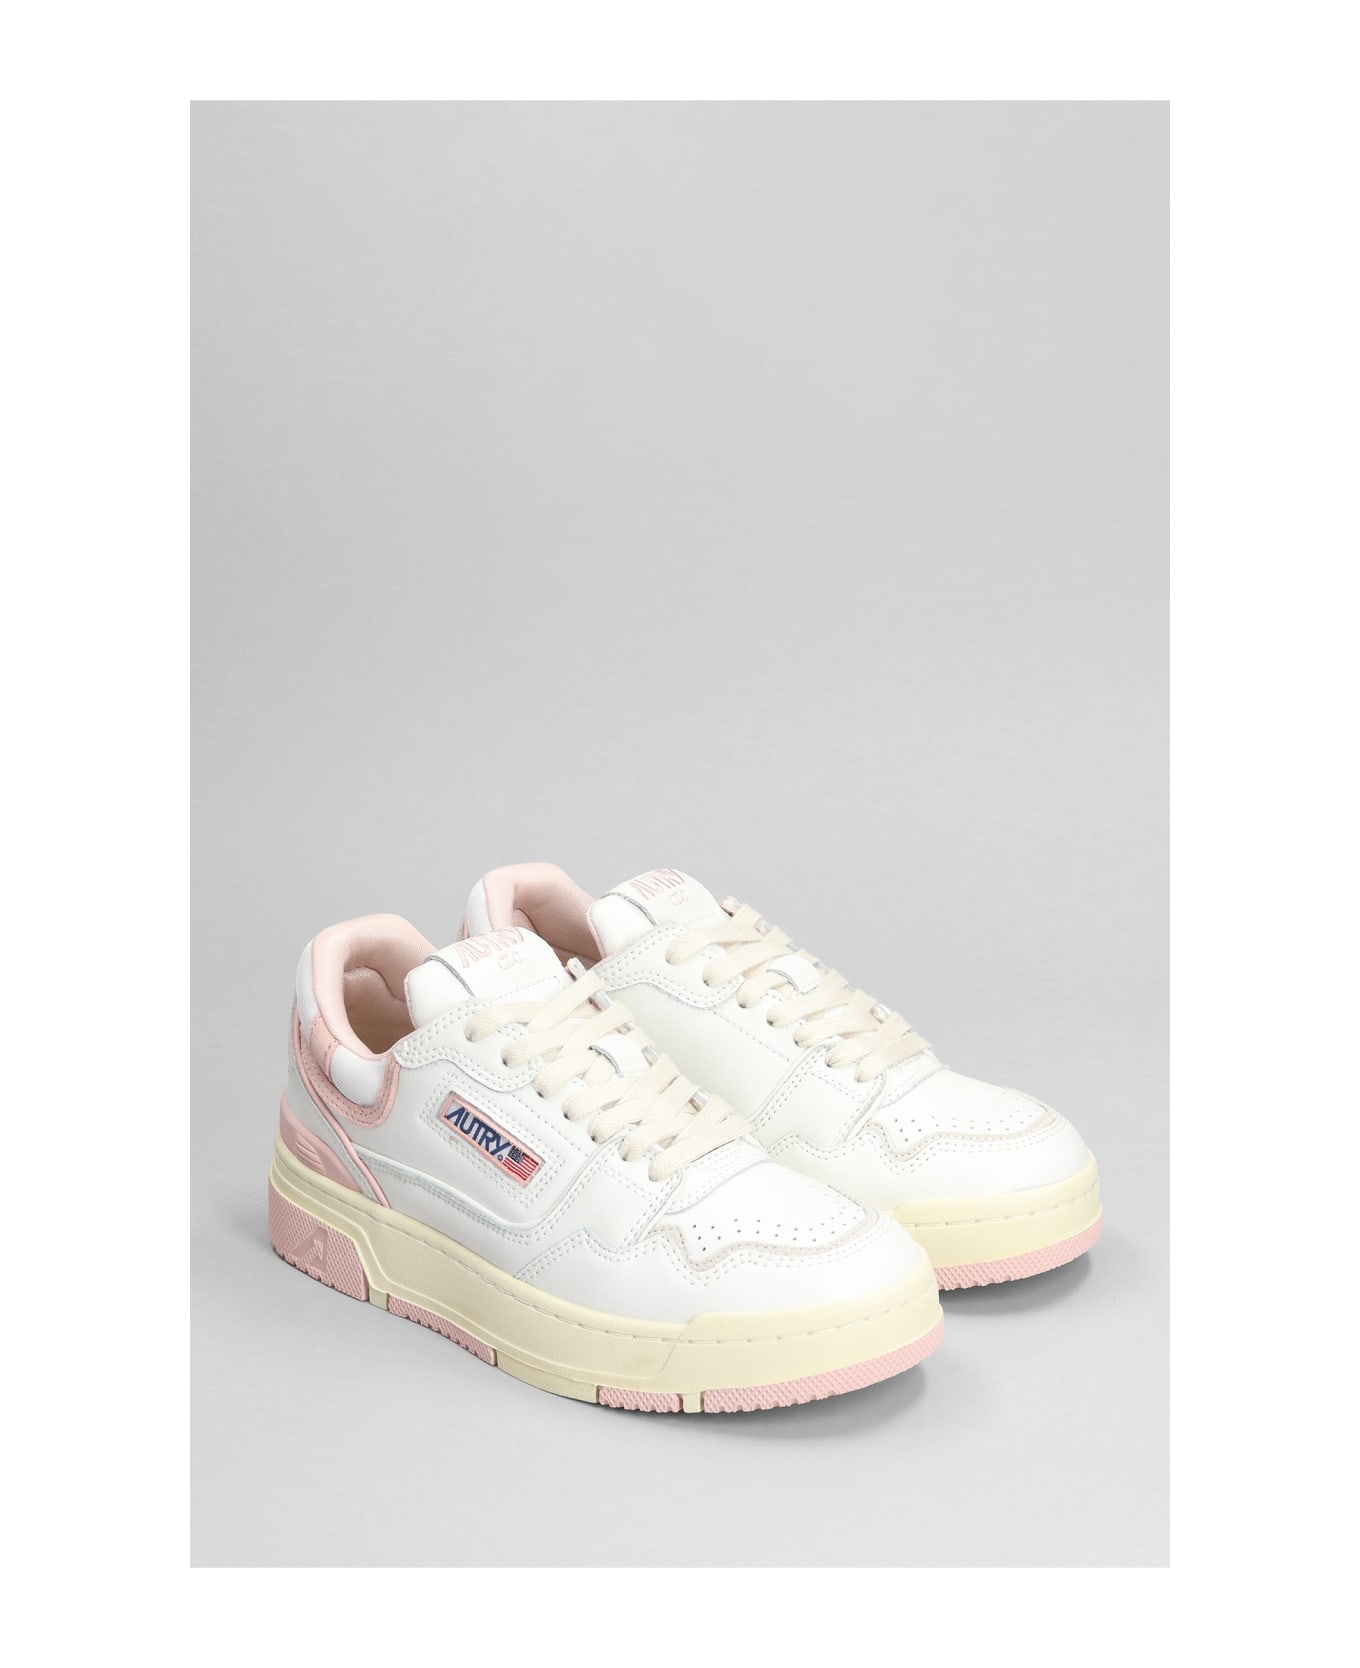 Autry Rookie Sneakers In White Leather - white